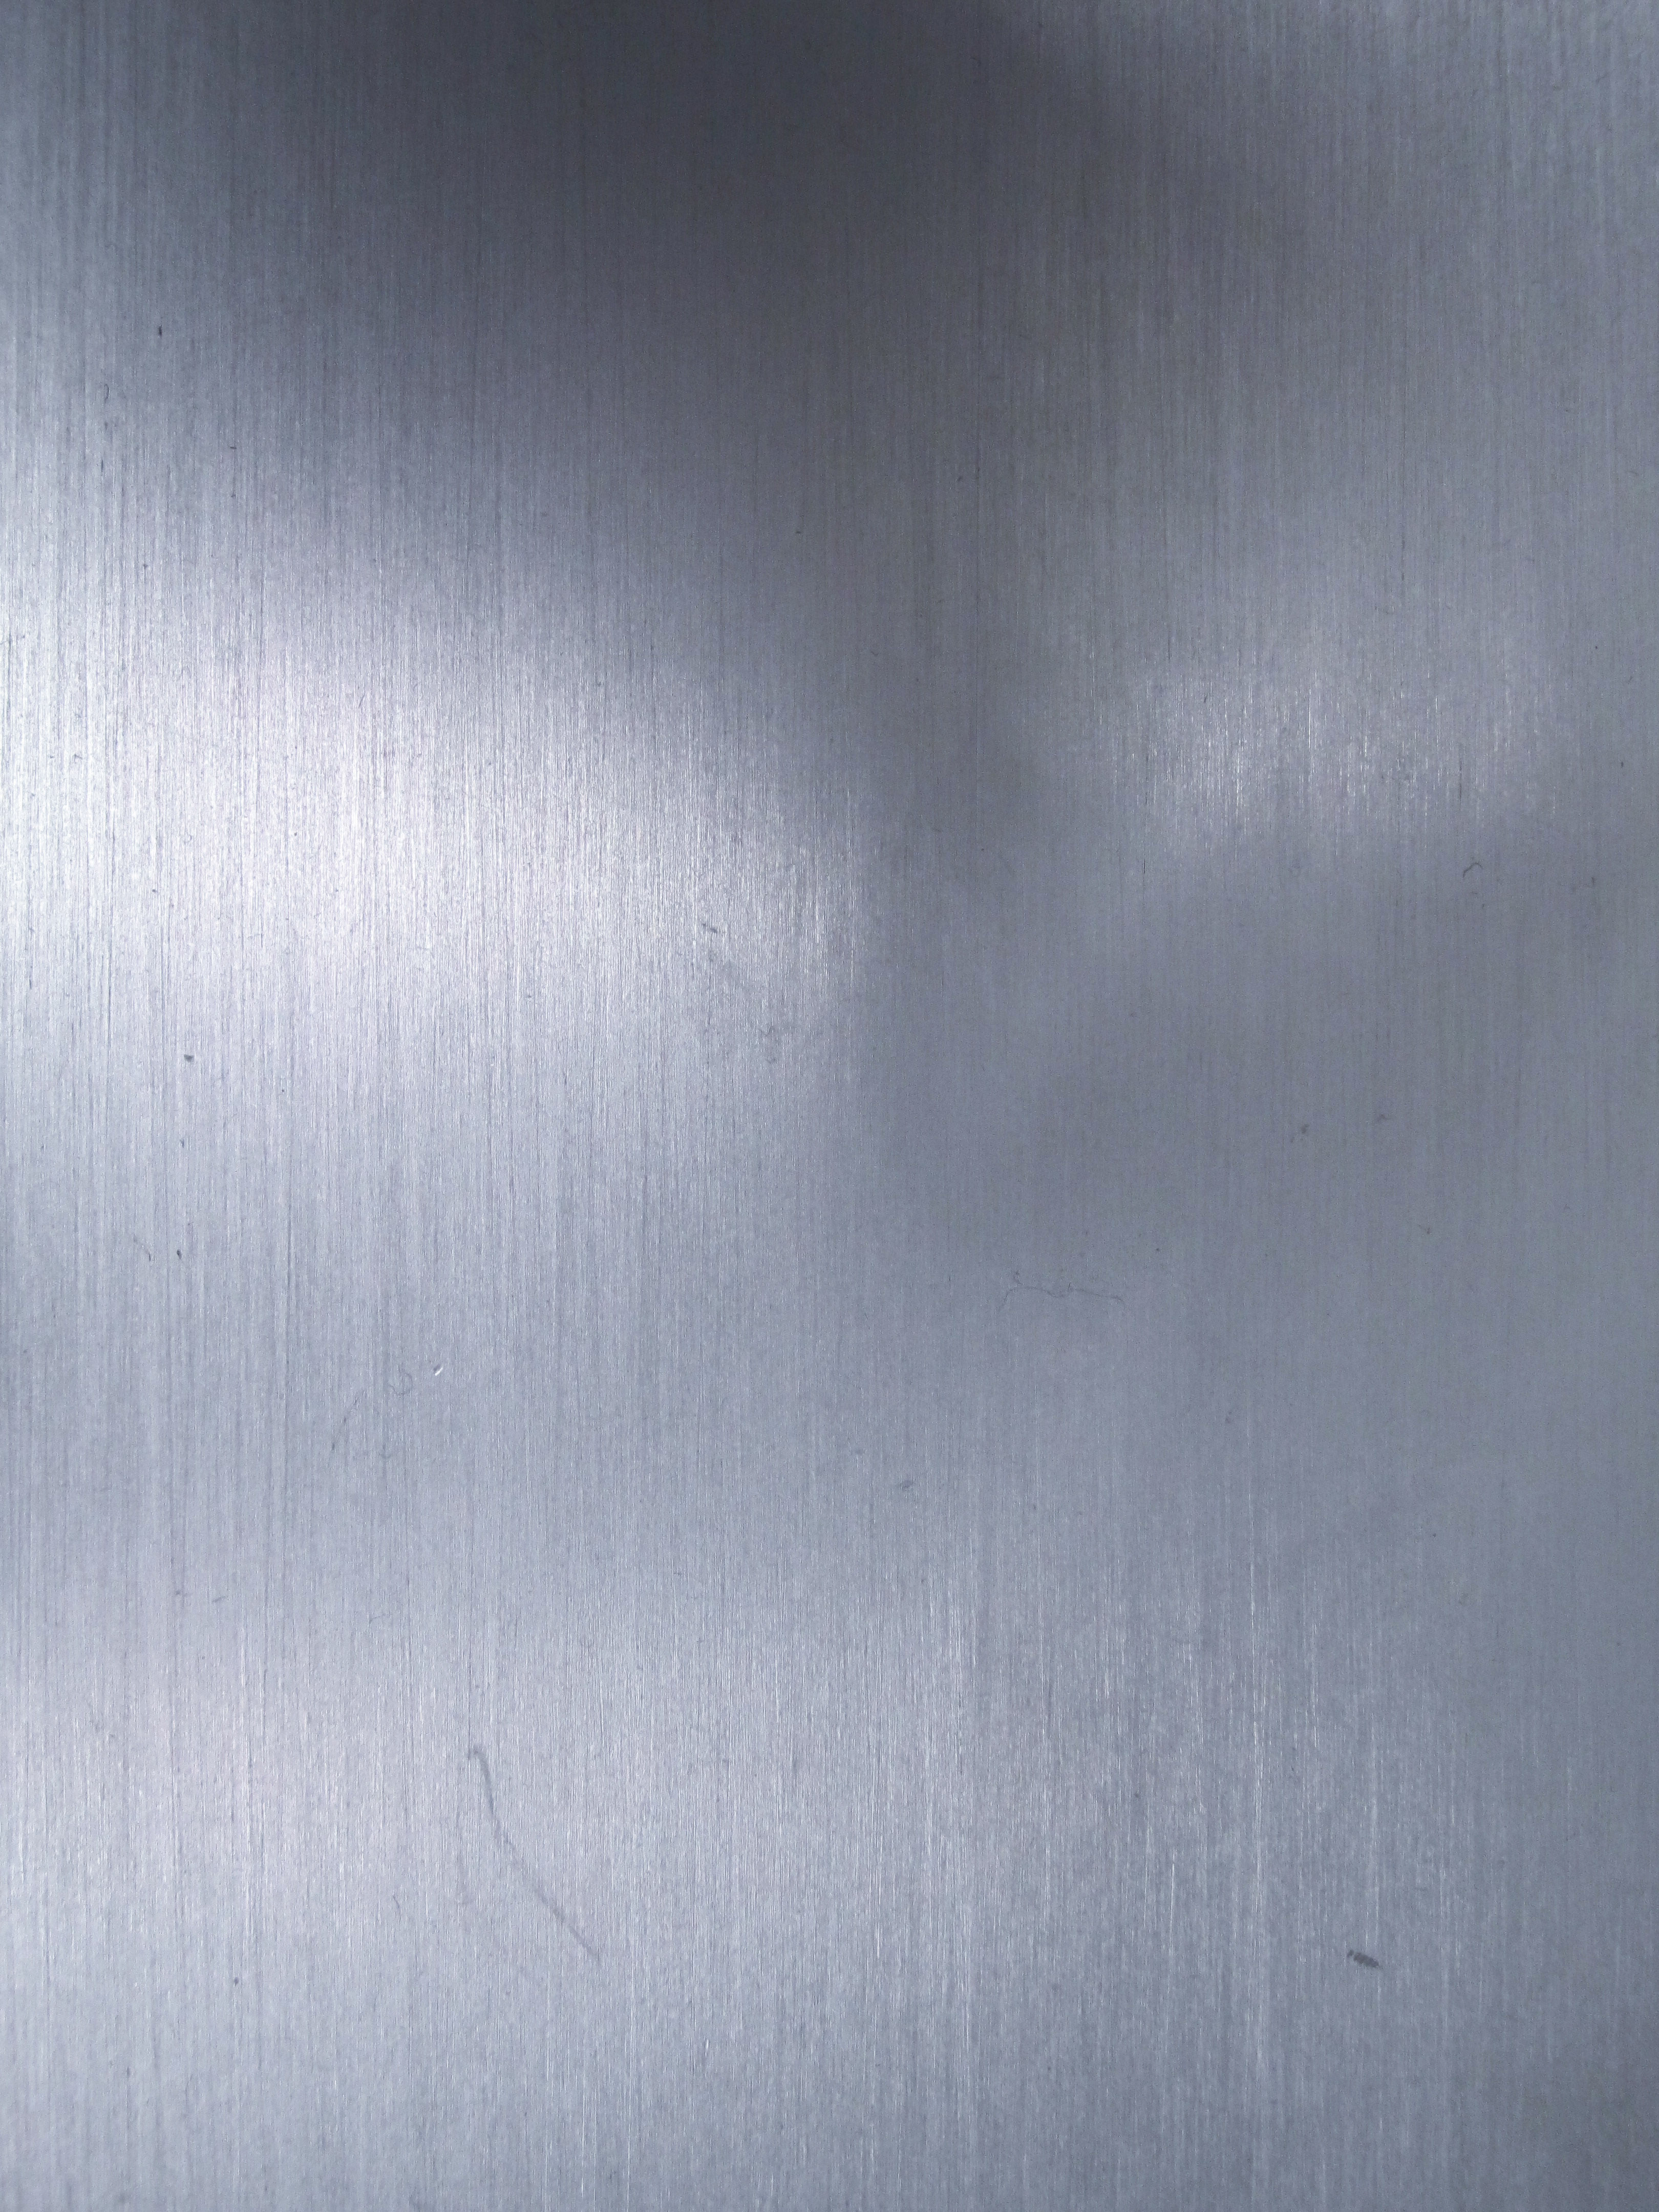 Gray Brushed Metal Texture Background Steel Or Aluminium Stock Photo -  Download Image Now - iStock